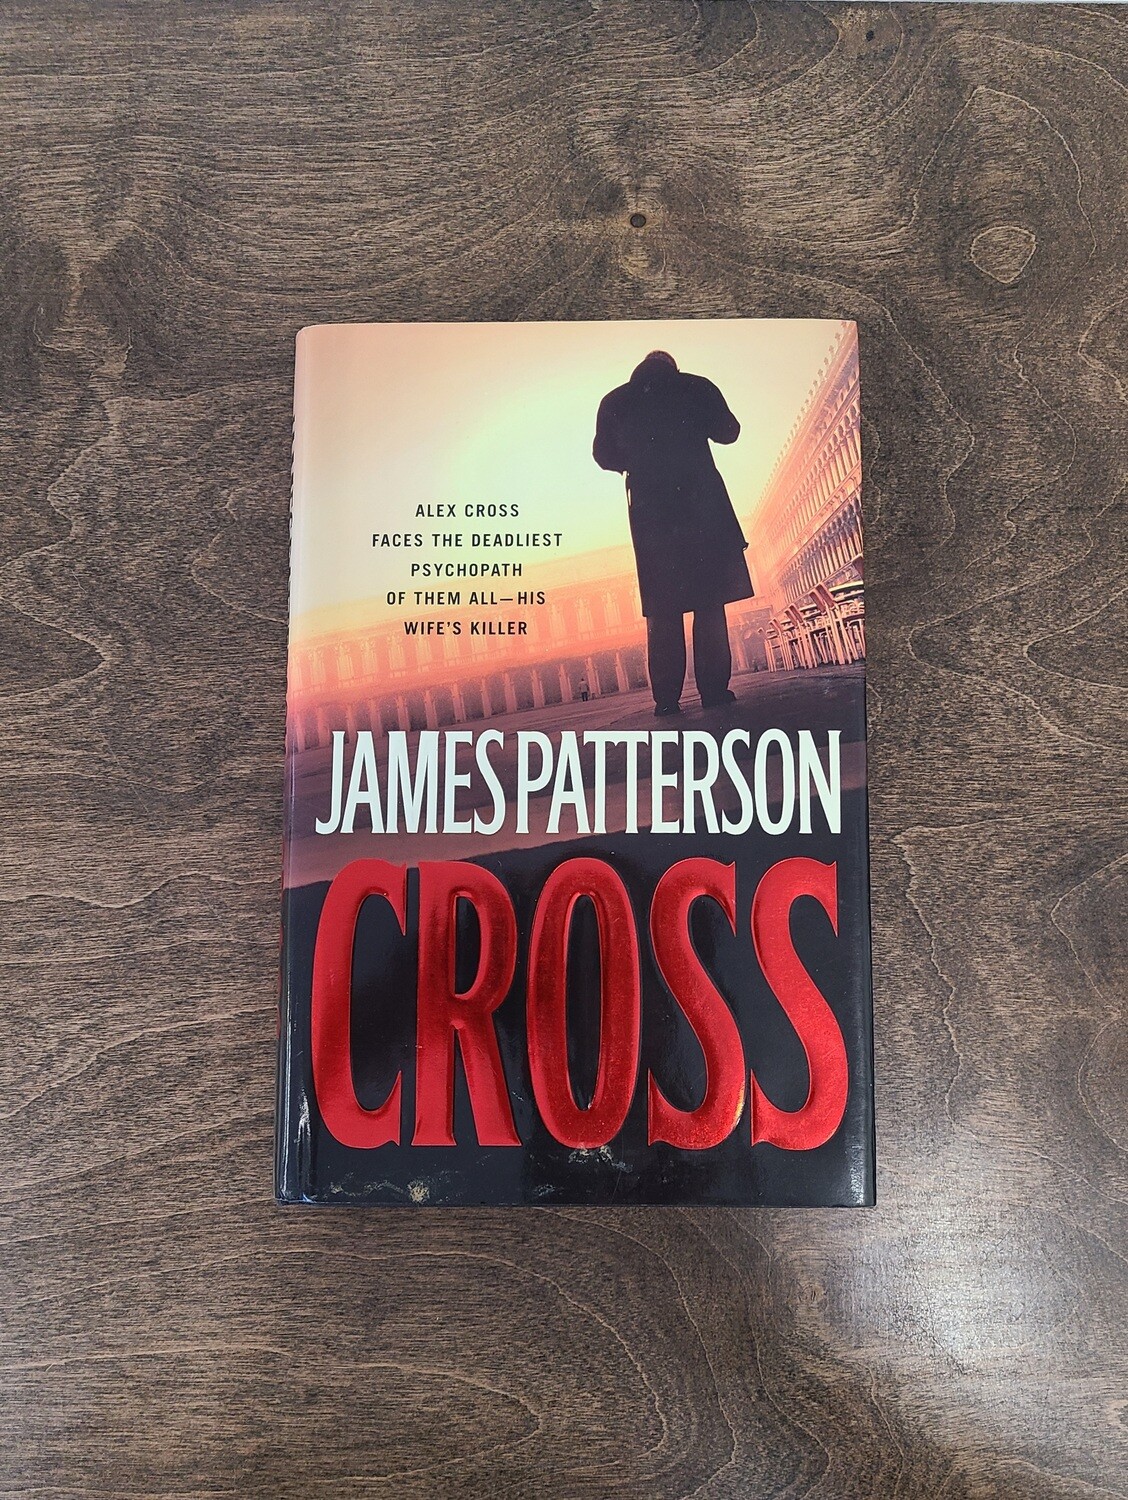 Cross by James Patterson